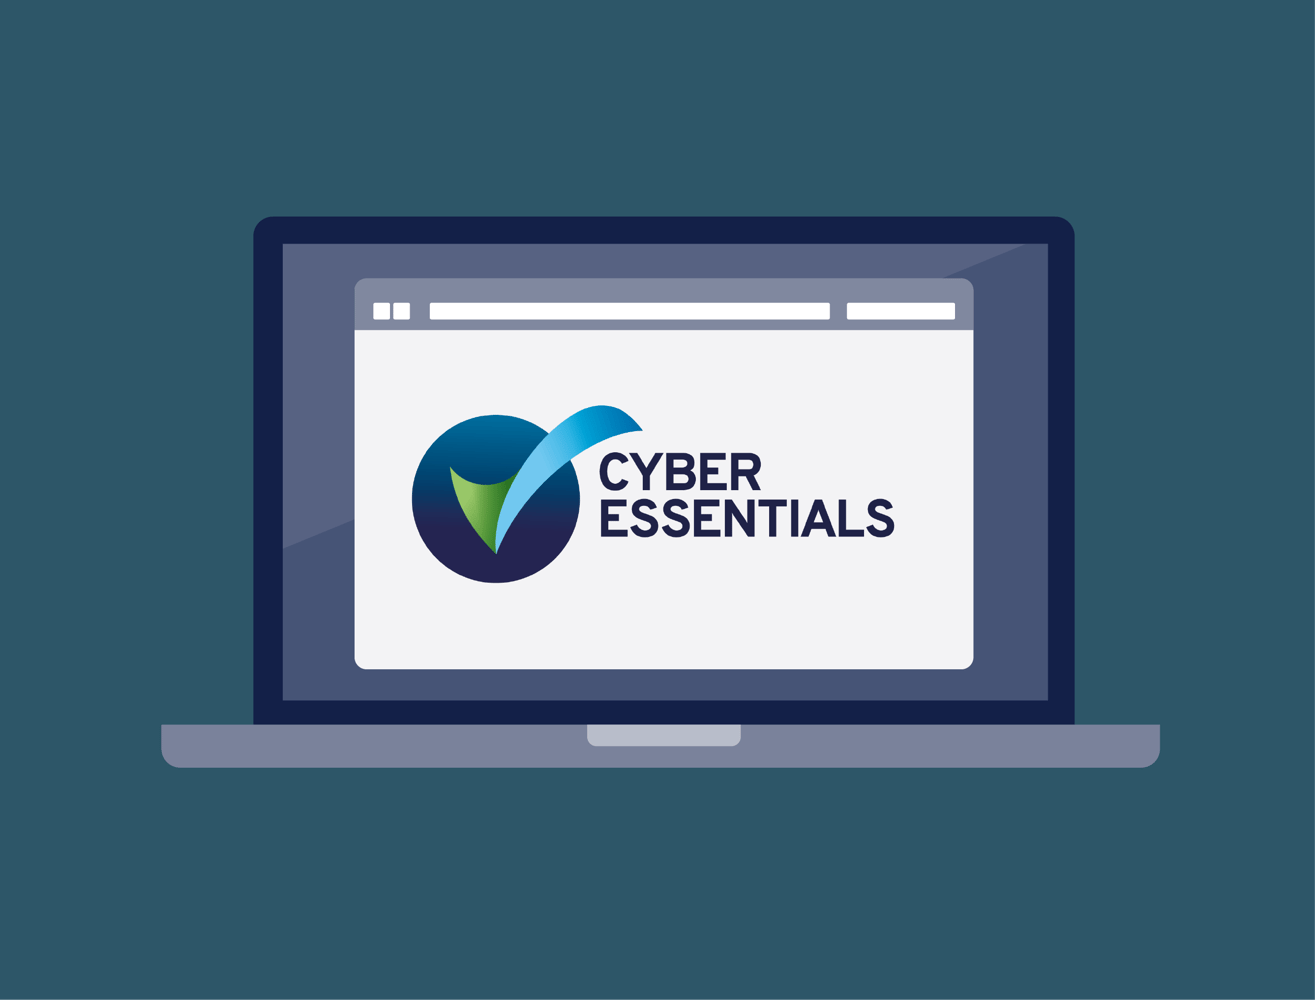 An introduction to Cyber Essentials